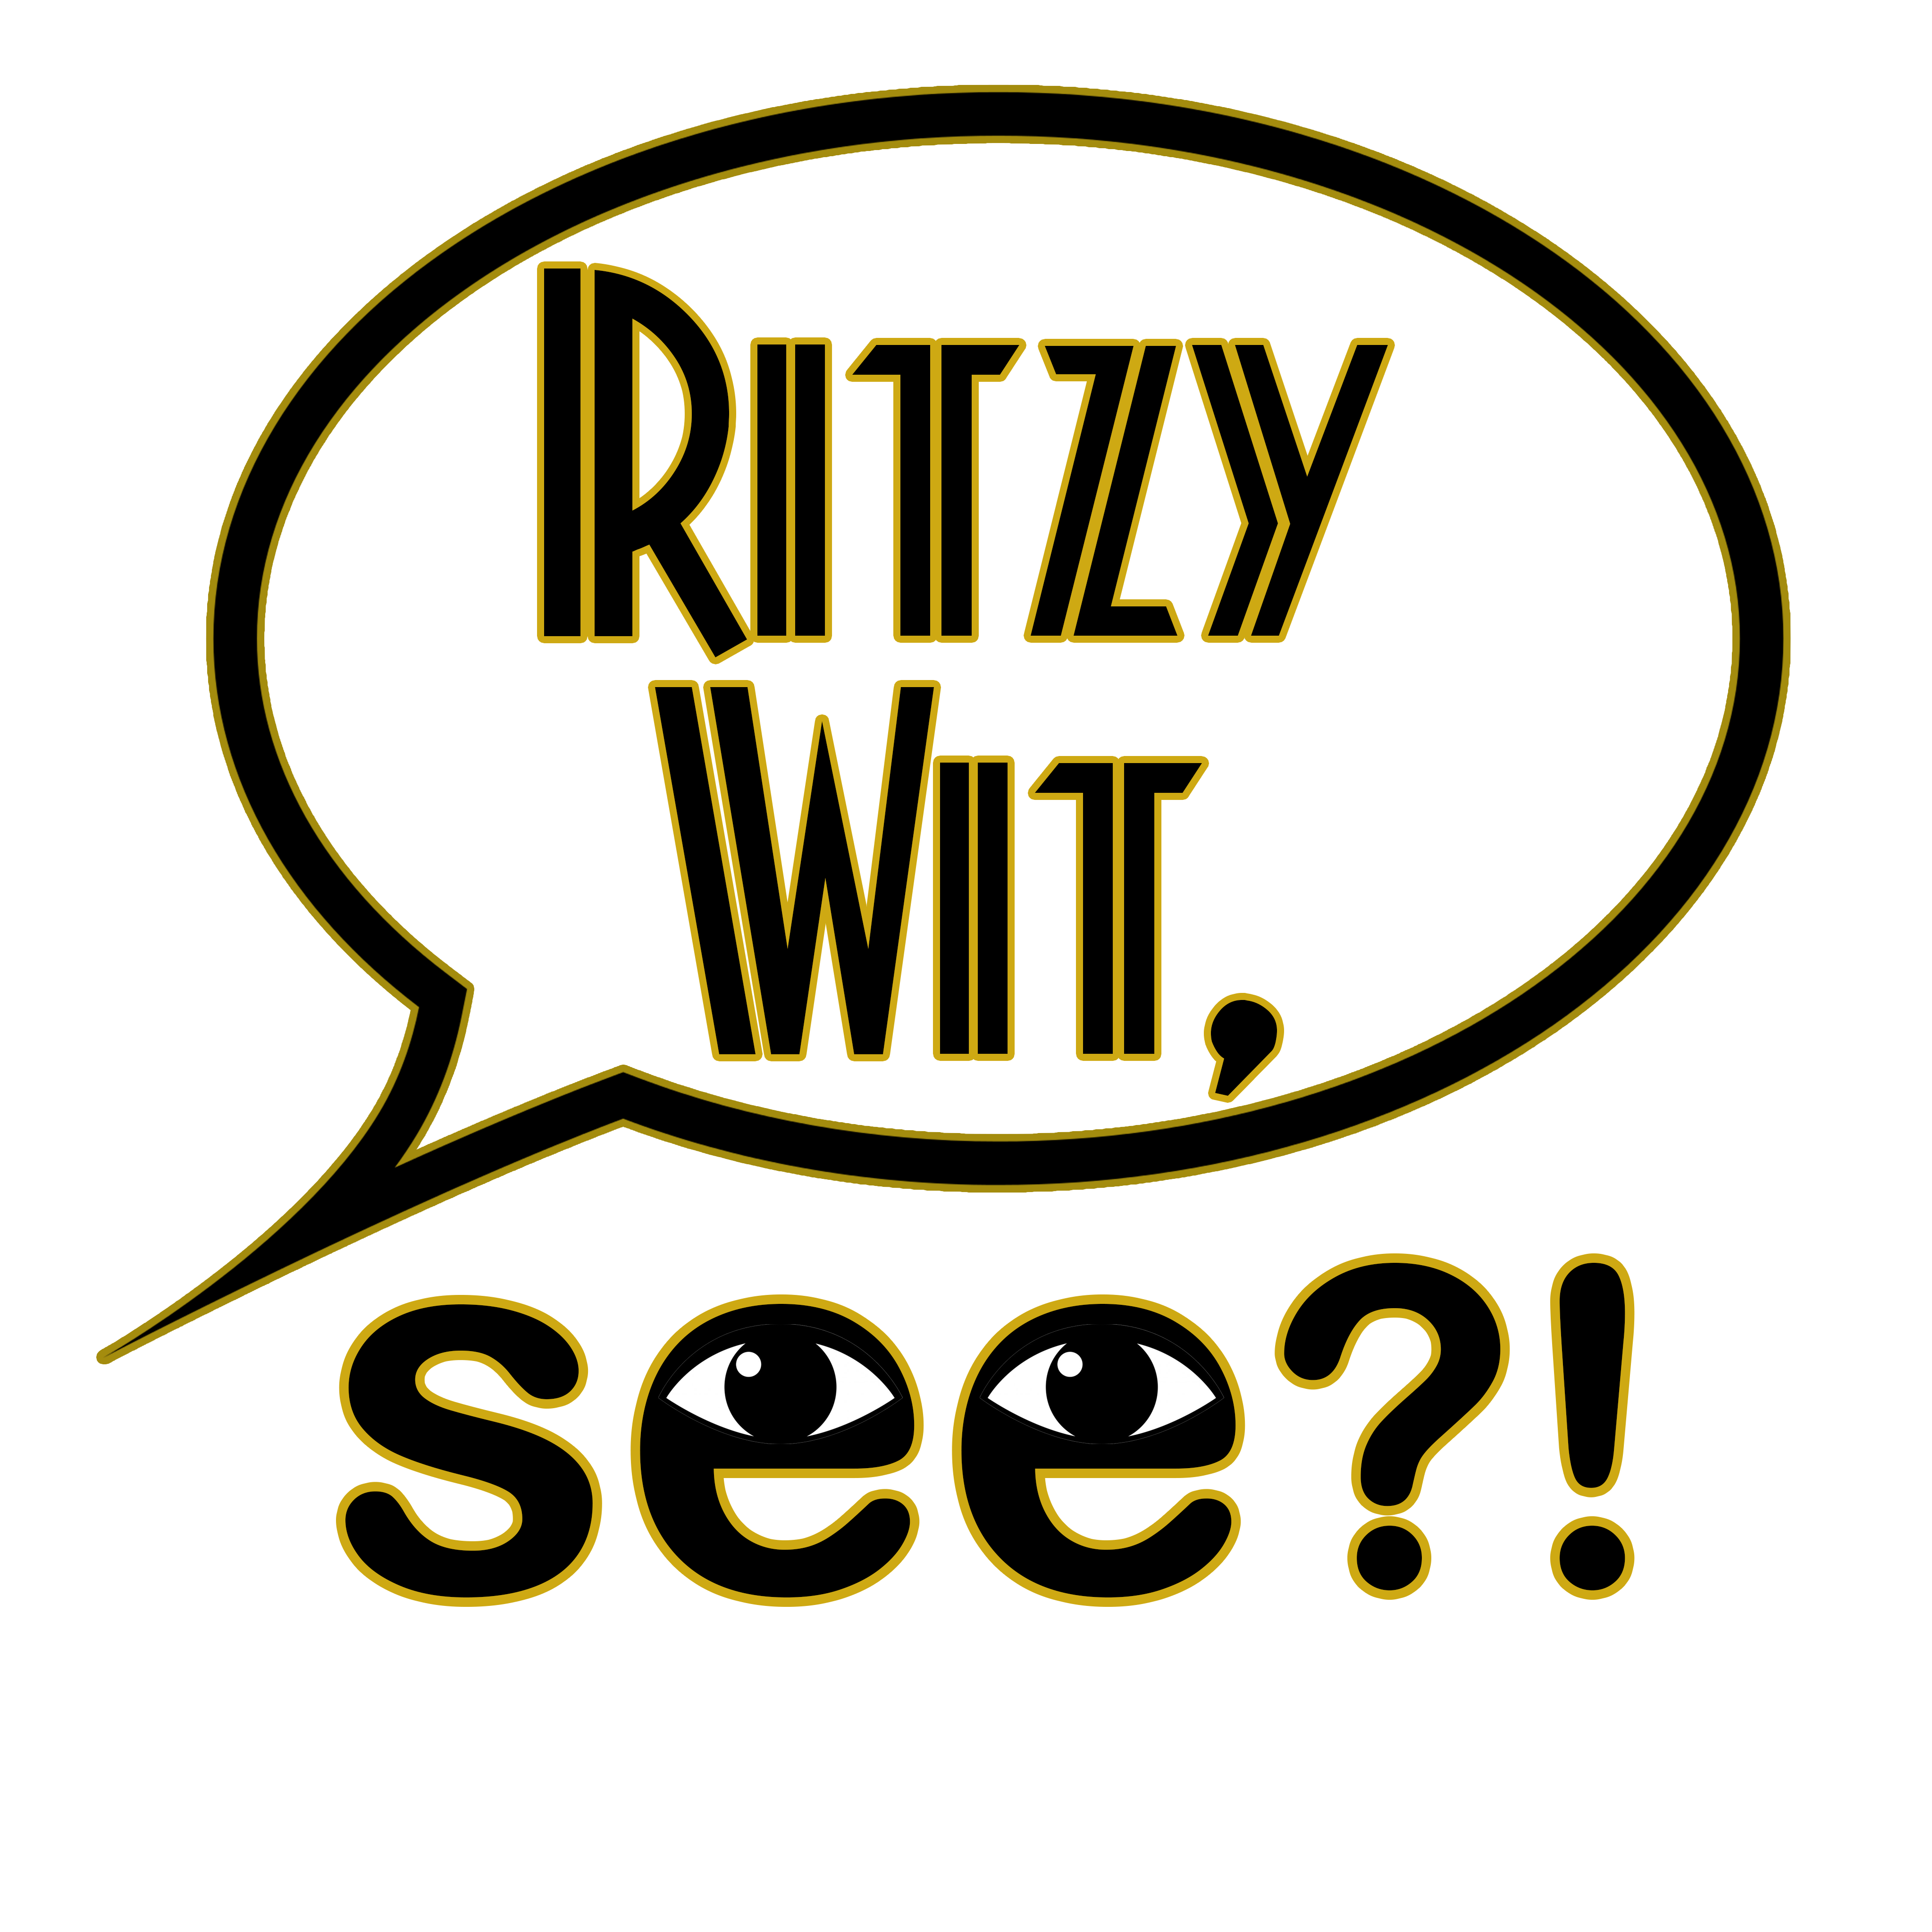 Ritzy Wit, See?!